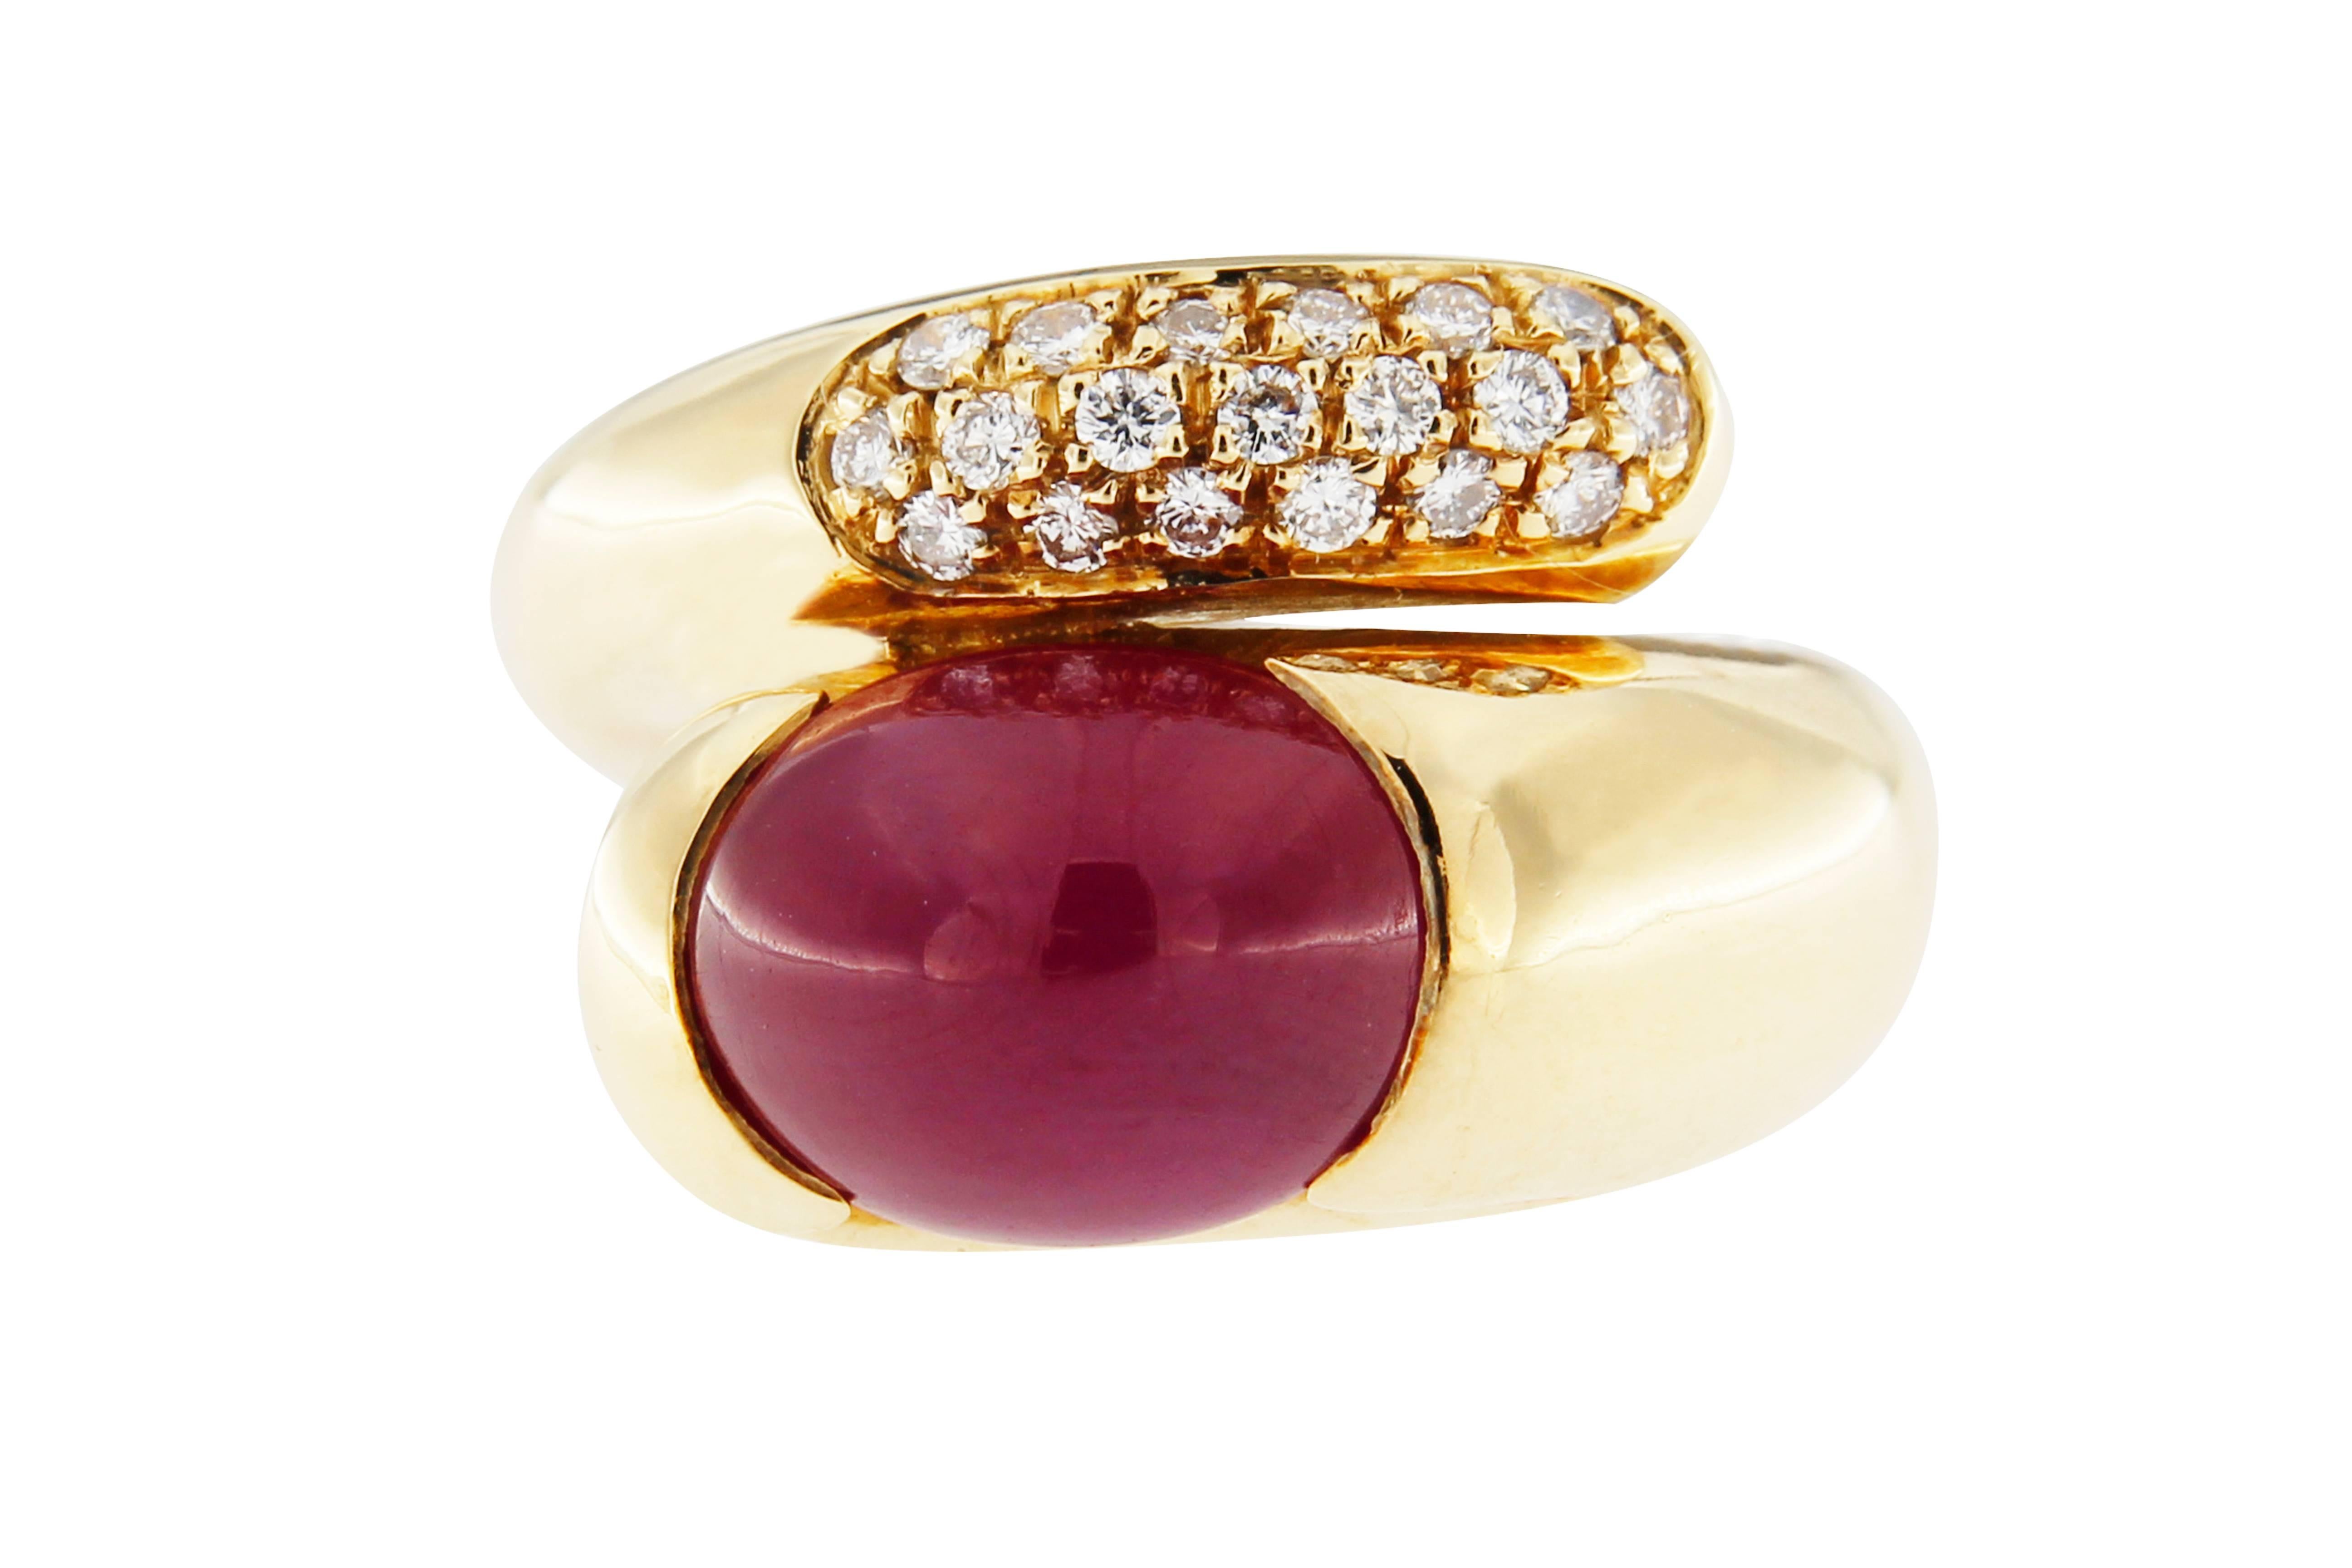 Jona design collection, 18k Yellow Gold Ring band set with a cabochon Ruby weighing 6.78 carats and 0.25 carats of white diamonds.  Ring size 6.5 US, can be sized to any specification.

All Jona jewelry is new and has never been previously owned or